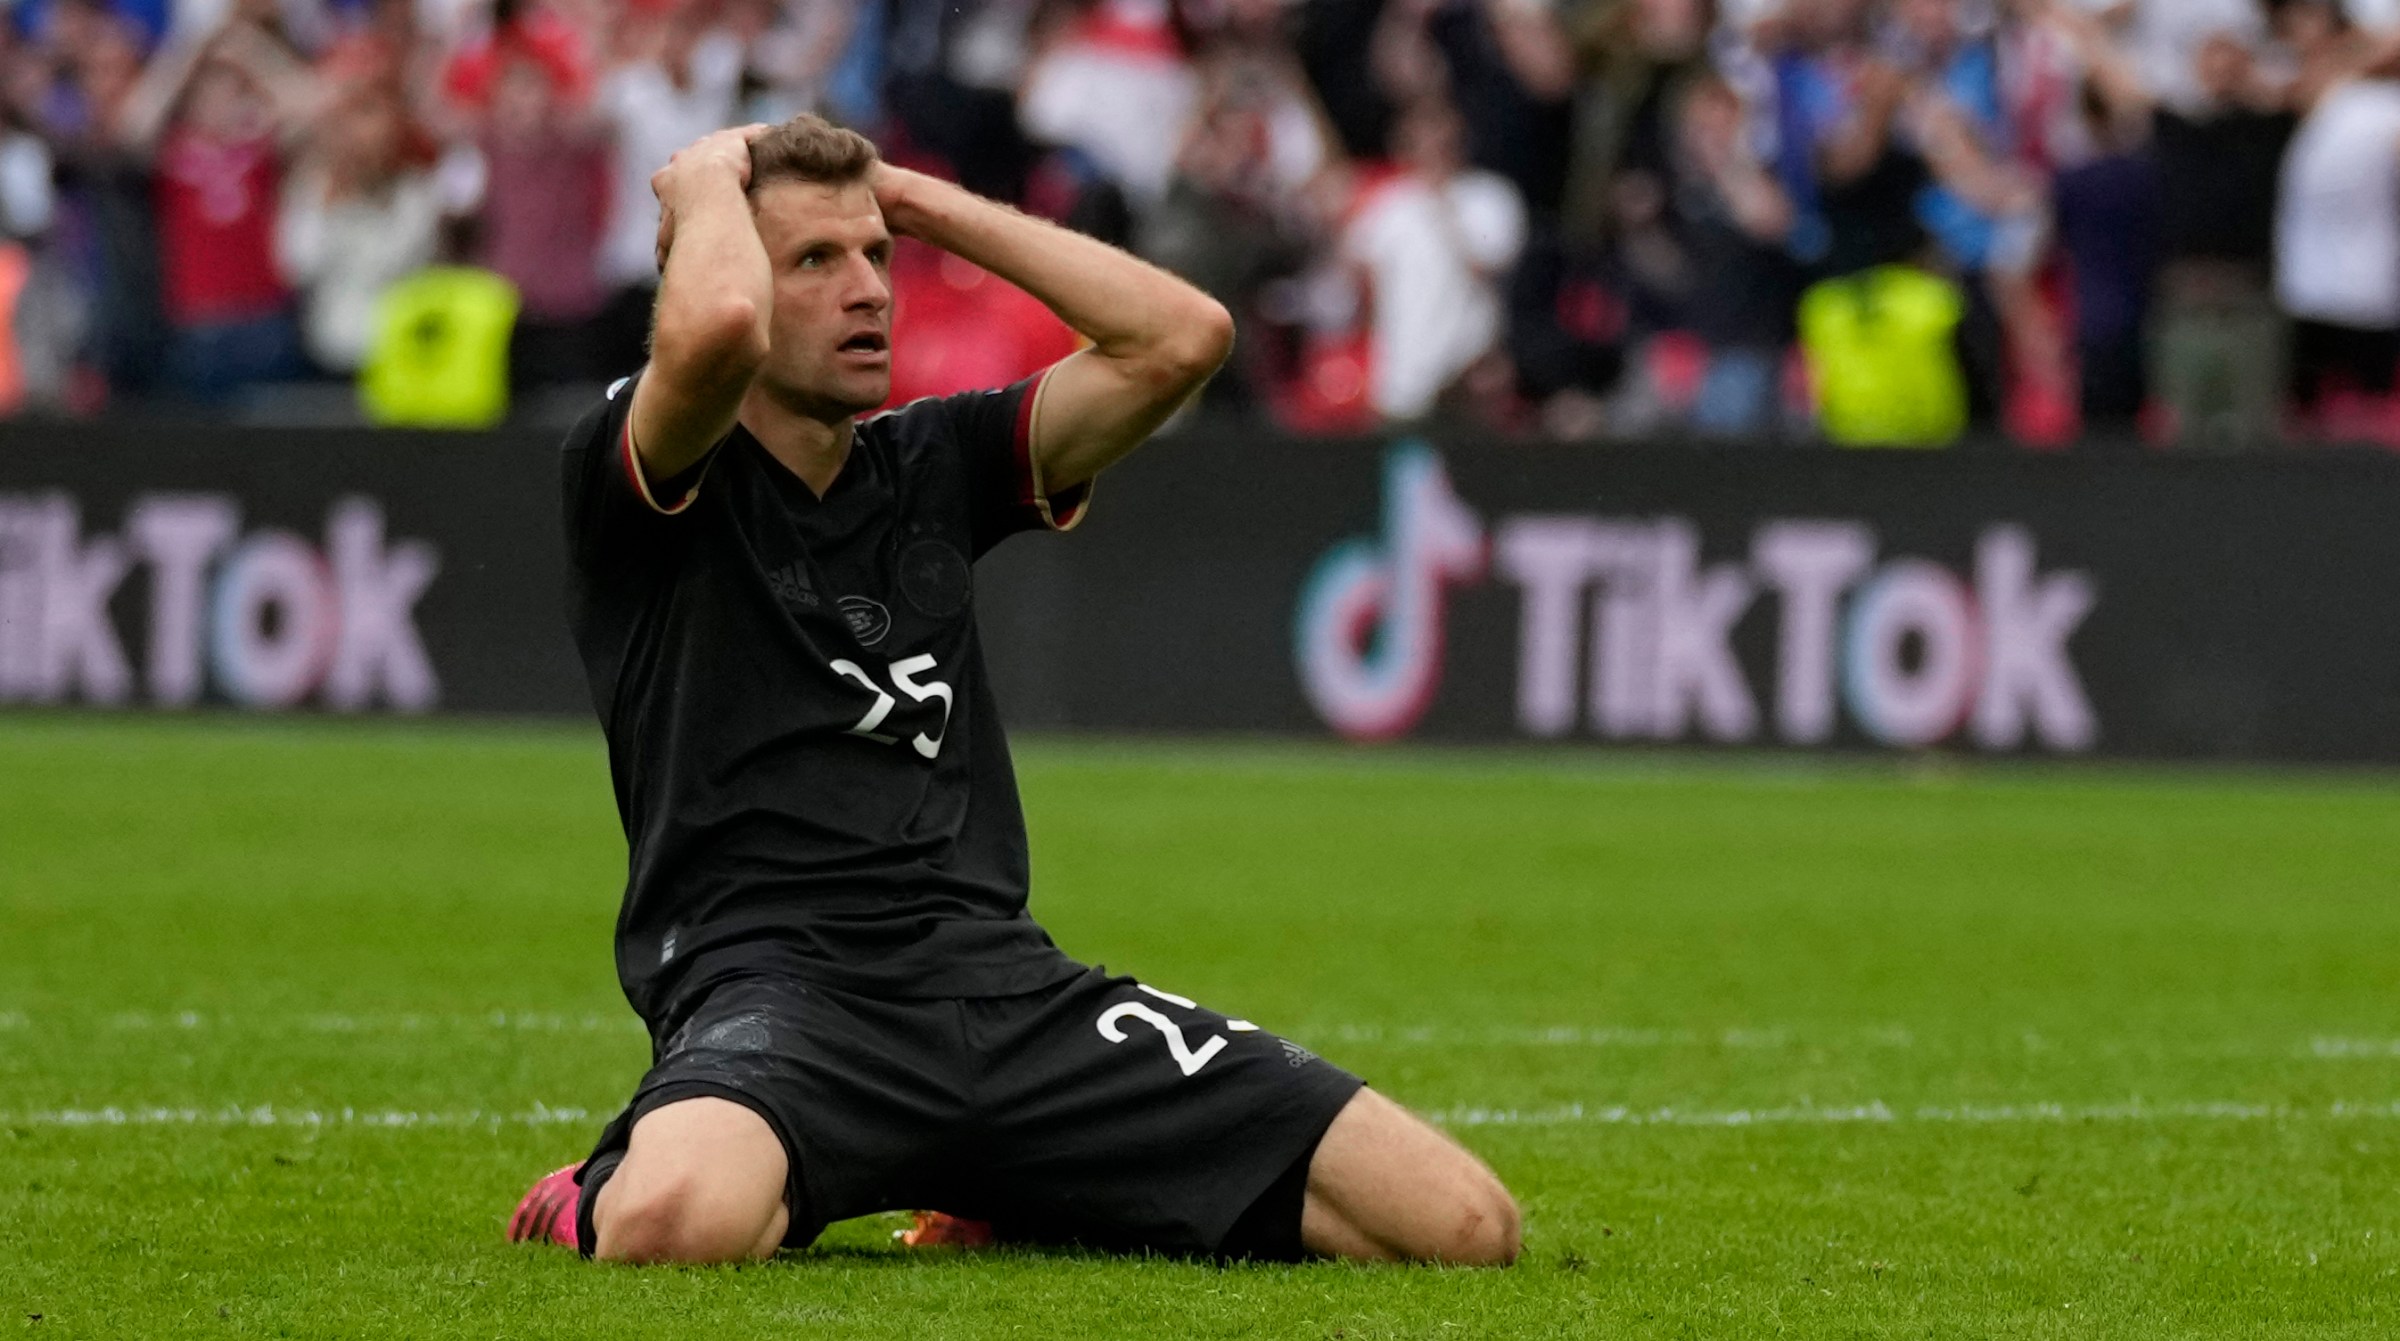 Germany's forward Thomas Mueller reacts to missing a goal opportunity during the UEFA EURO 2020 round of 16 football match between England and Germany at Wembley Stadium in London on June 29, 2021.